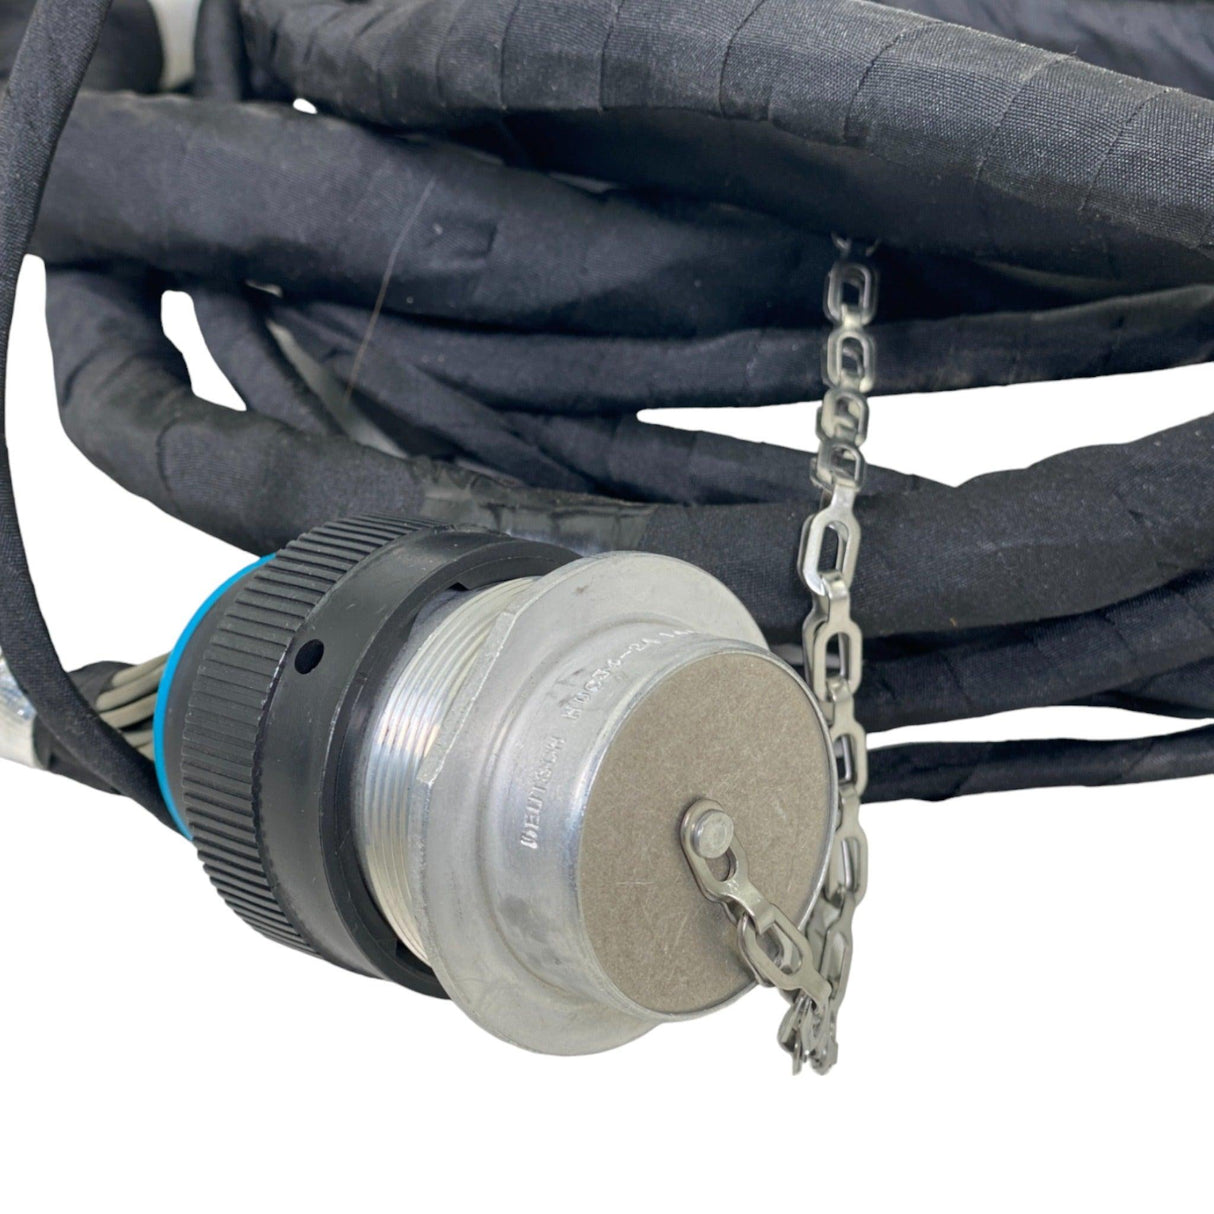 A66-02790-001 Genuine Freightliner® Kit Harness Ats.